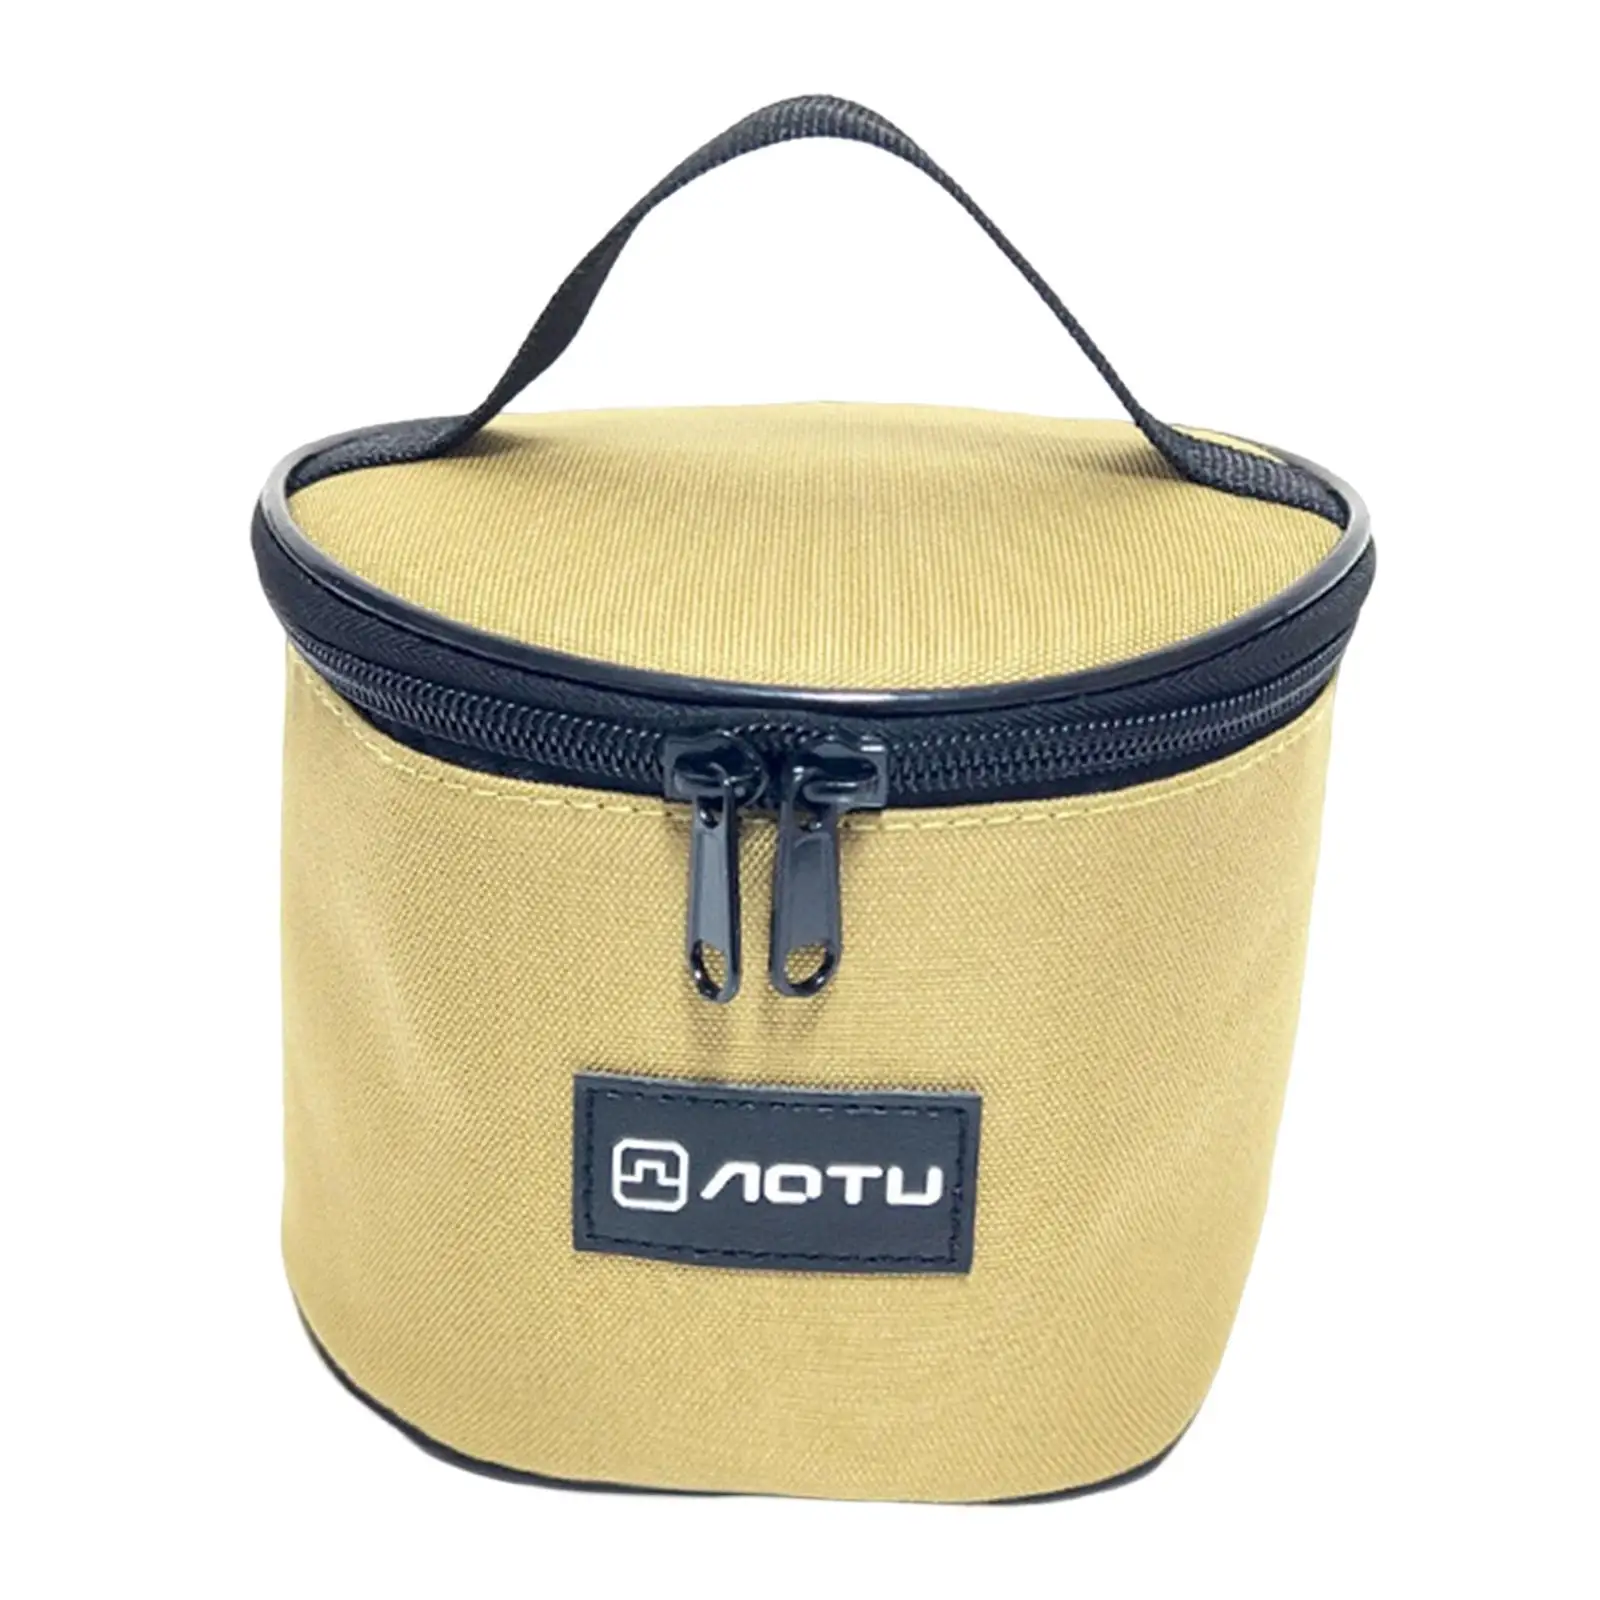 Camping Bowl Storage Bag Carry Case Hiking Organizer Waterproof Tableware Activities Outdoor Pouch for Picnic Dinnerware Cutlery